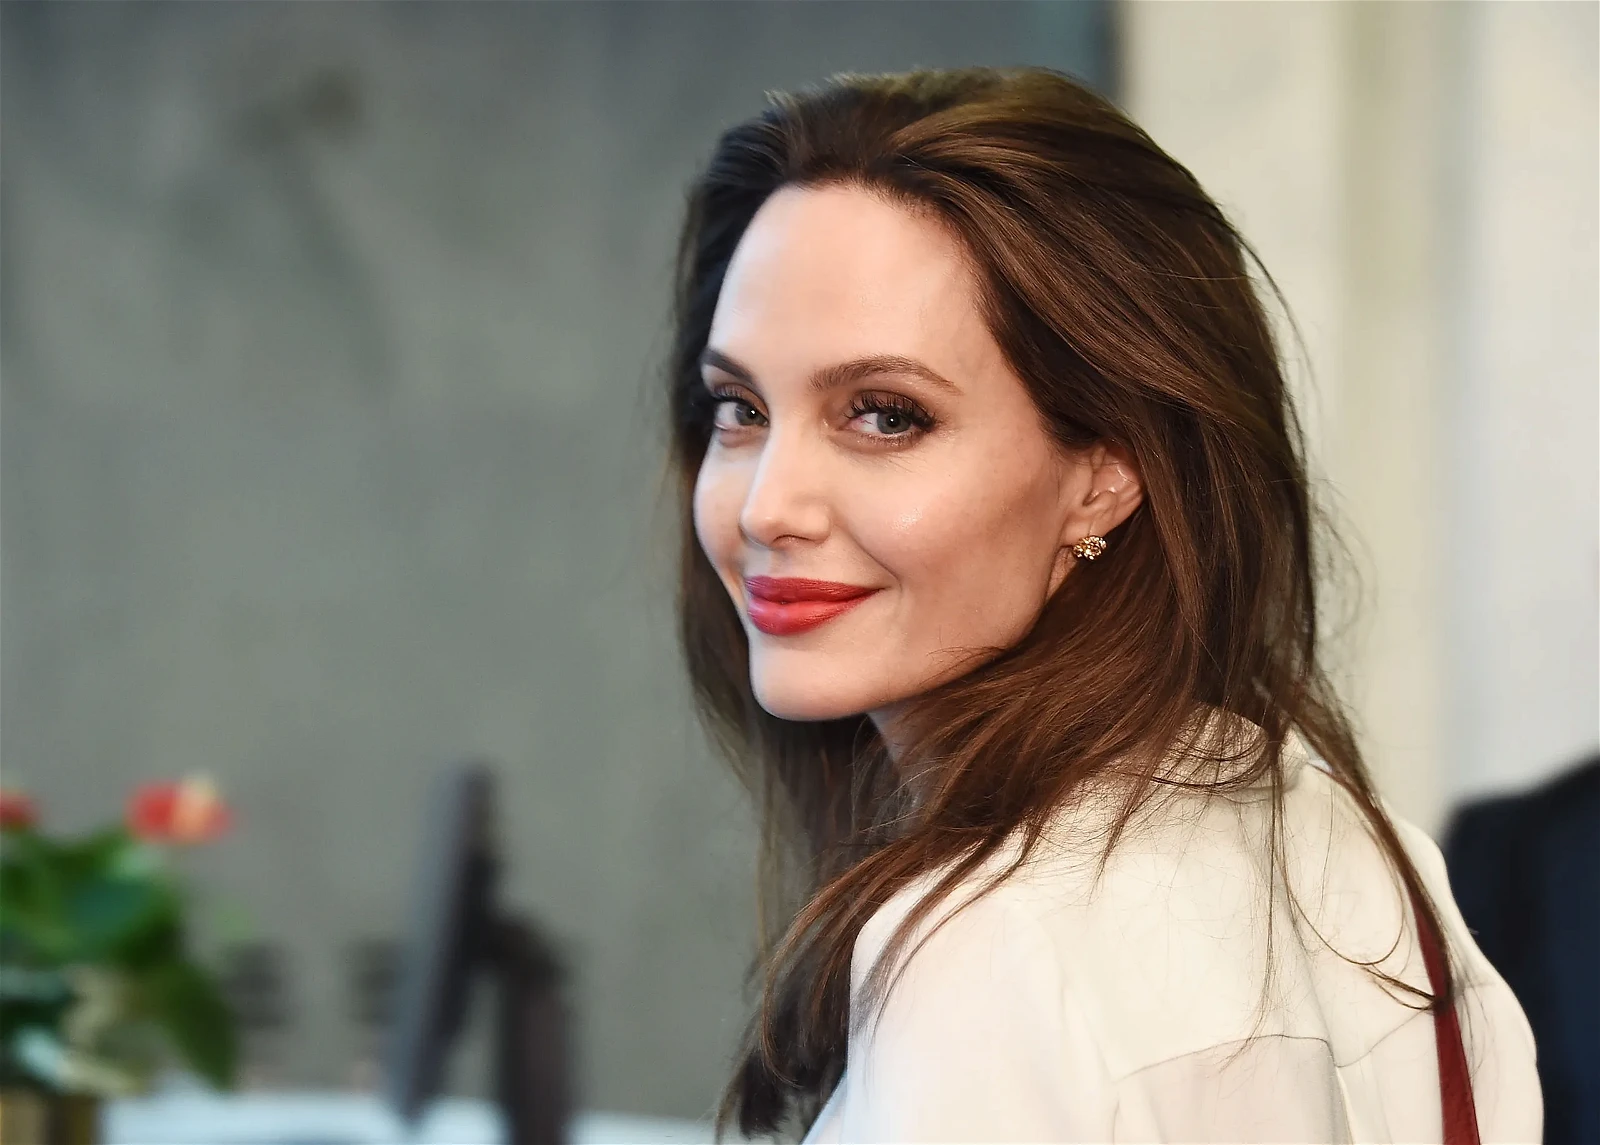 Angelina Jolie is renowned for her blunt and outspoken personality